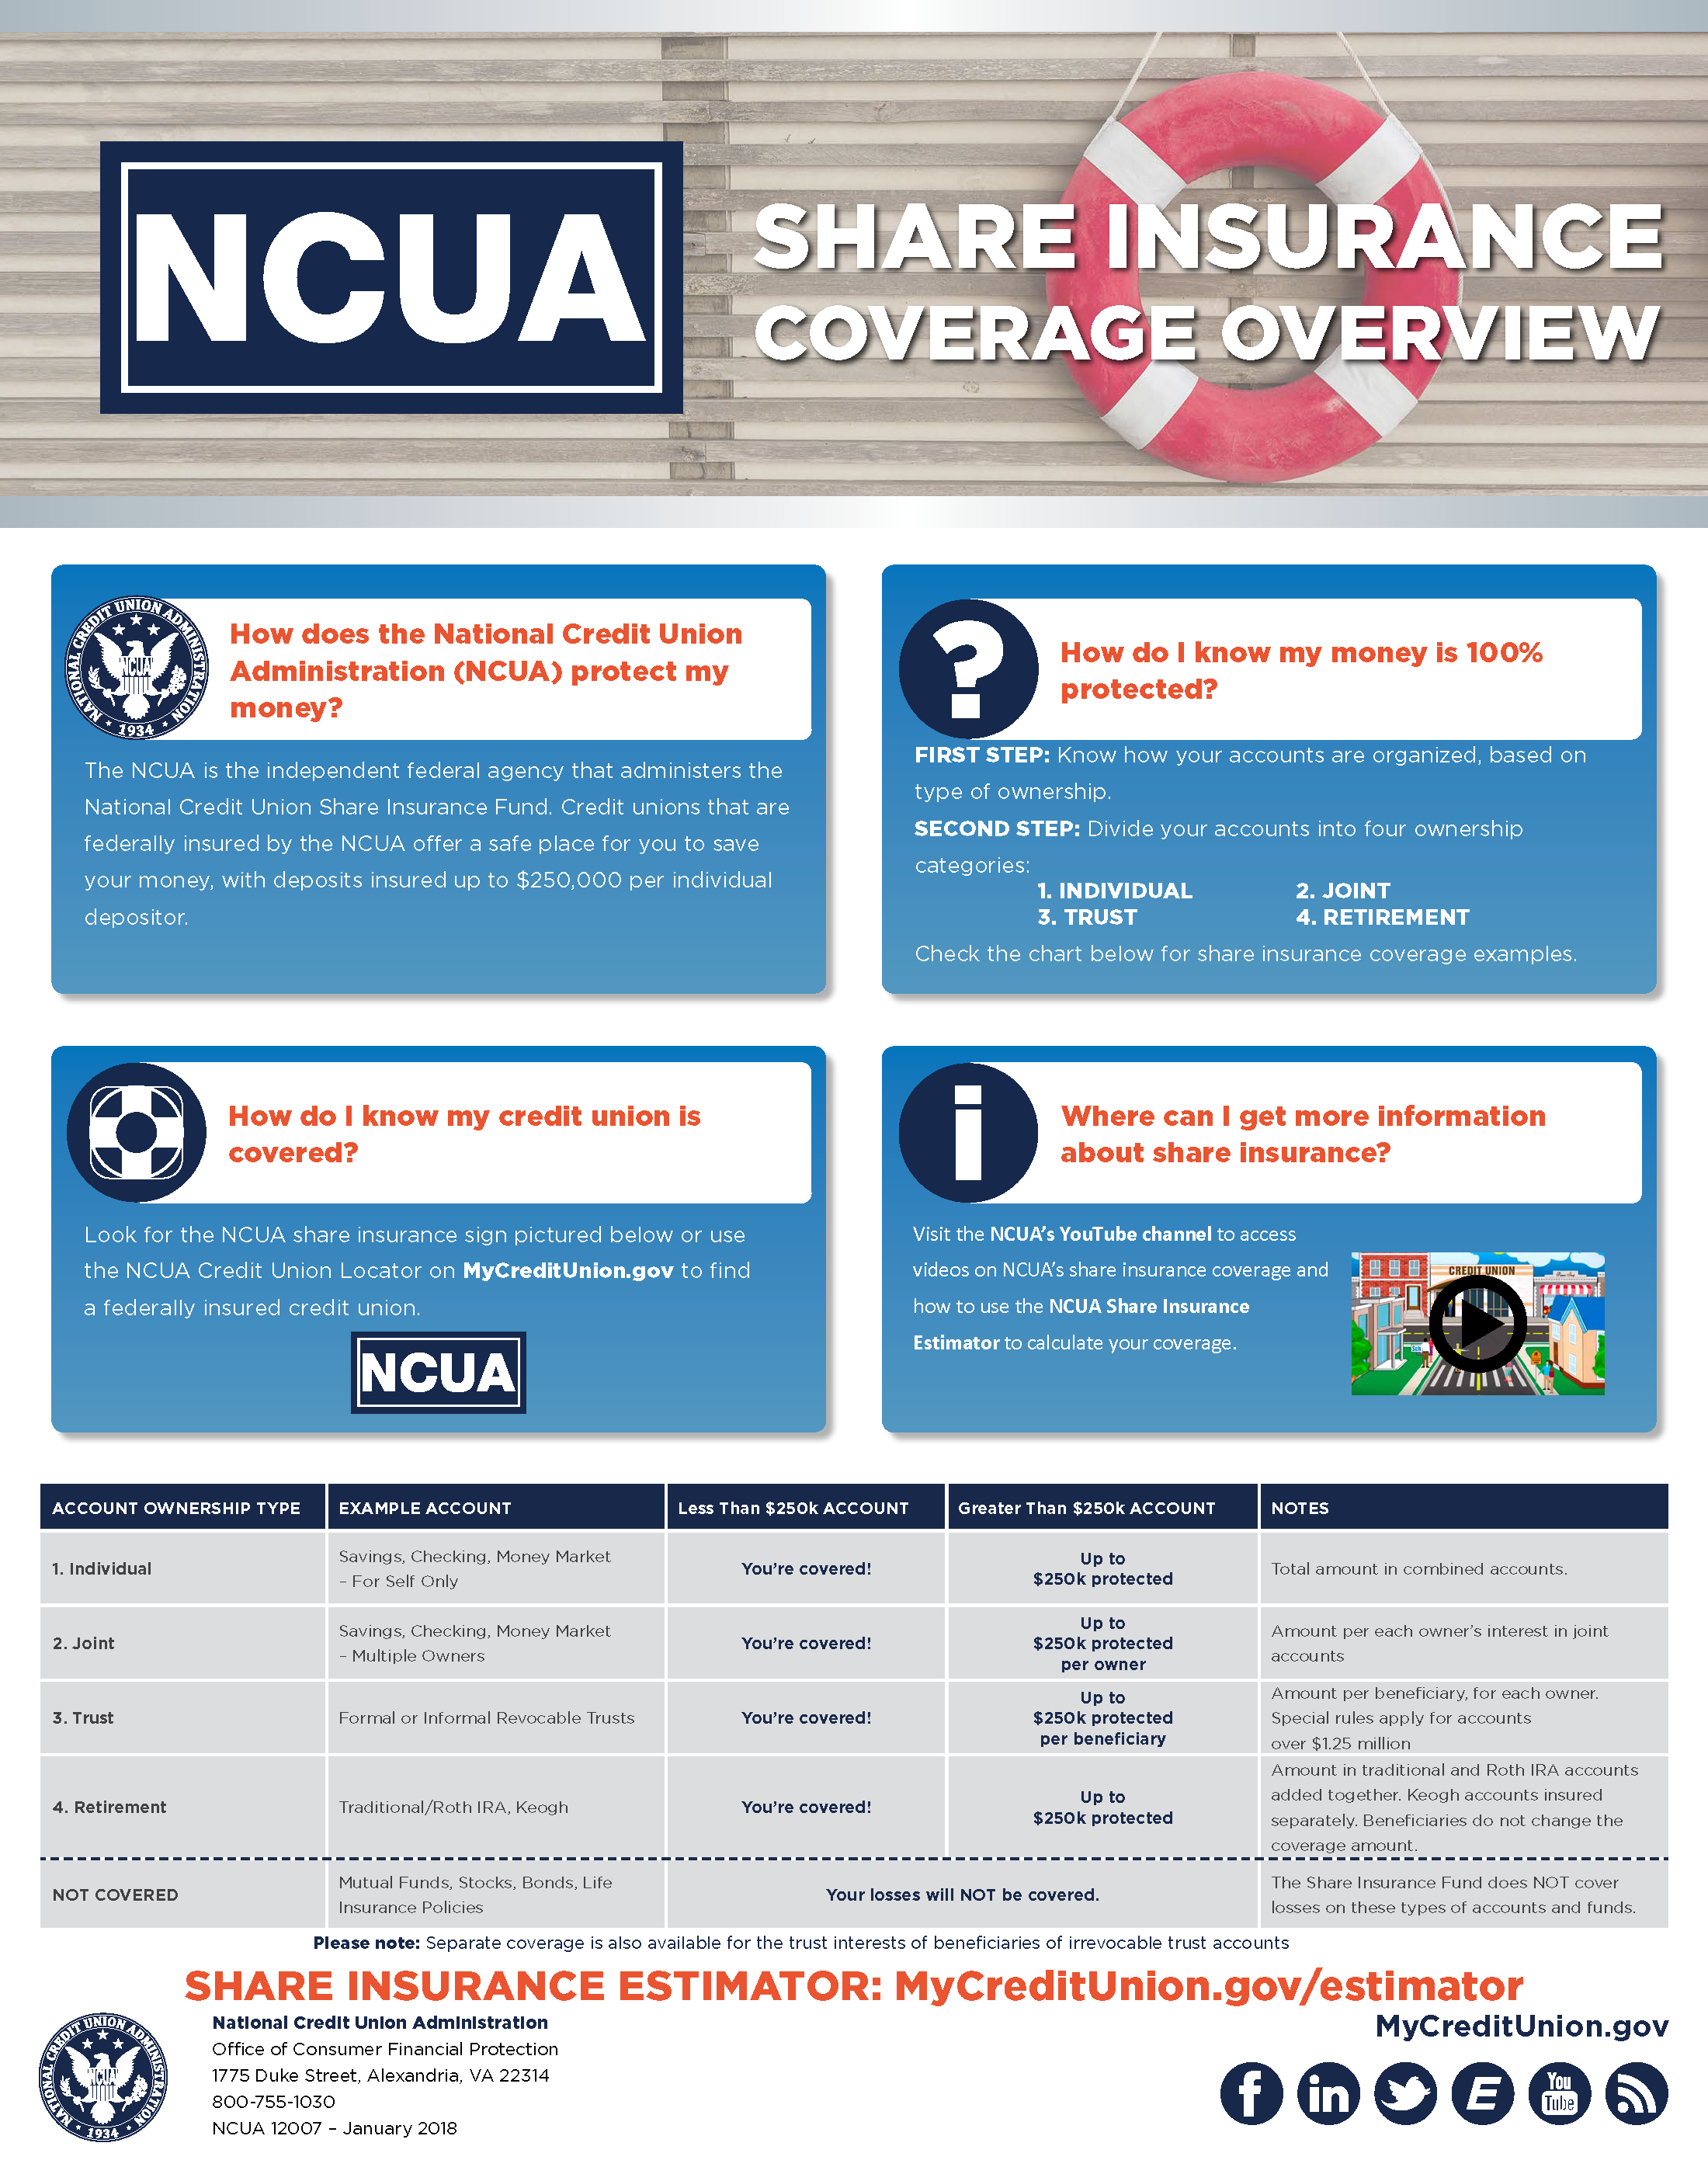 NCUA Share Insurance Coverage Overview infographic